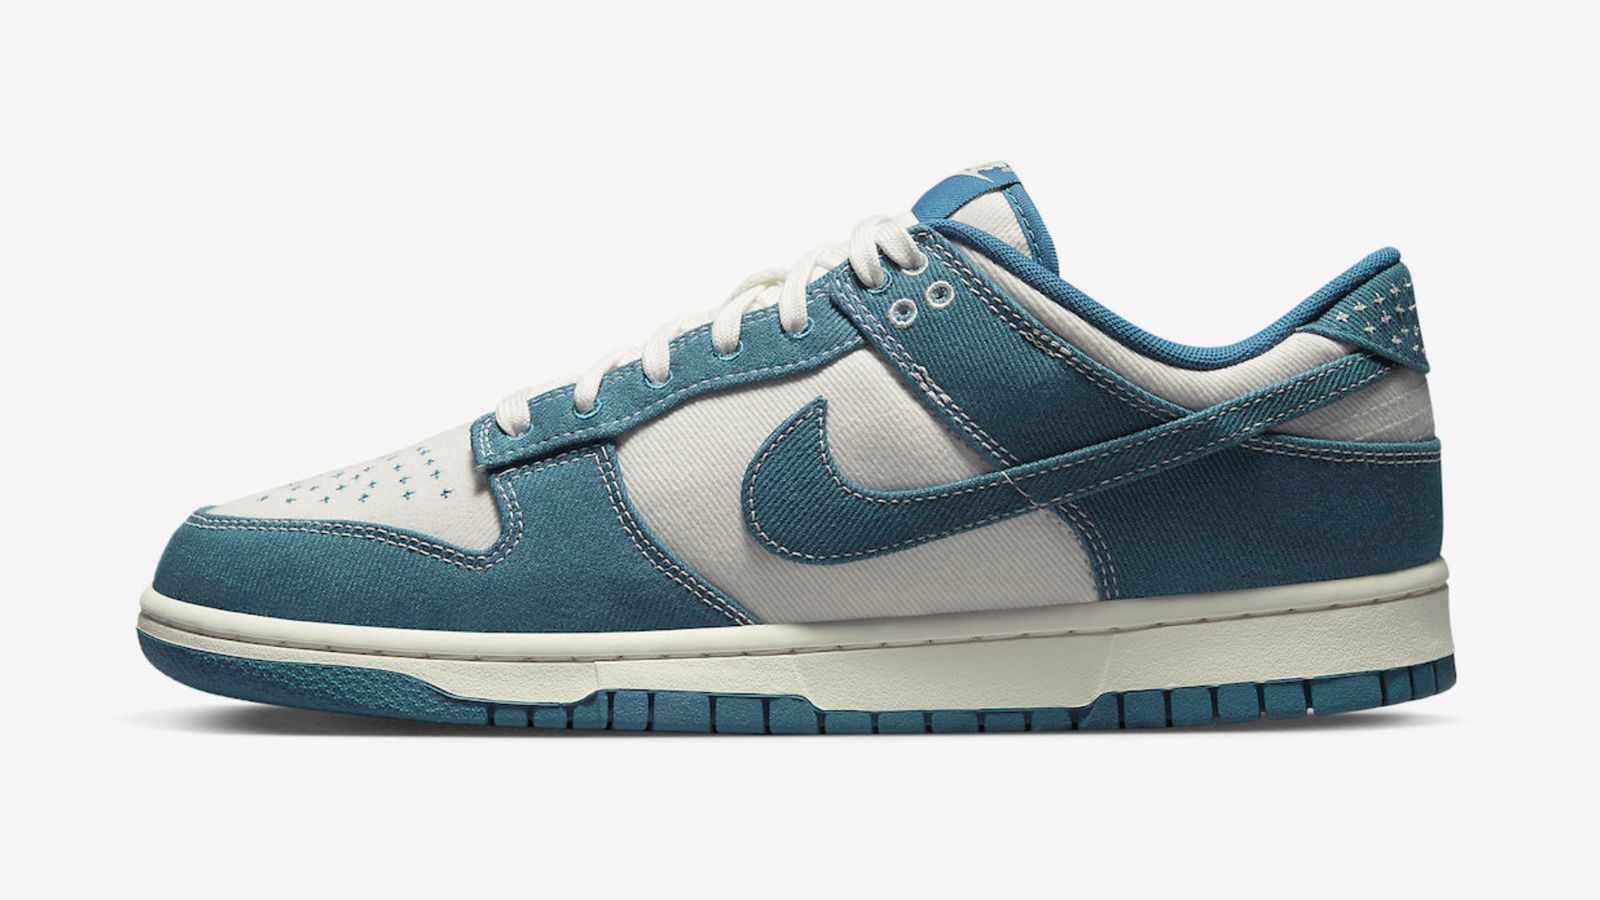 Nike Dunk Low "Industrial Blue" product image of a sneaker with a white base and blue overlays